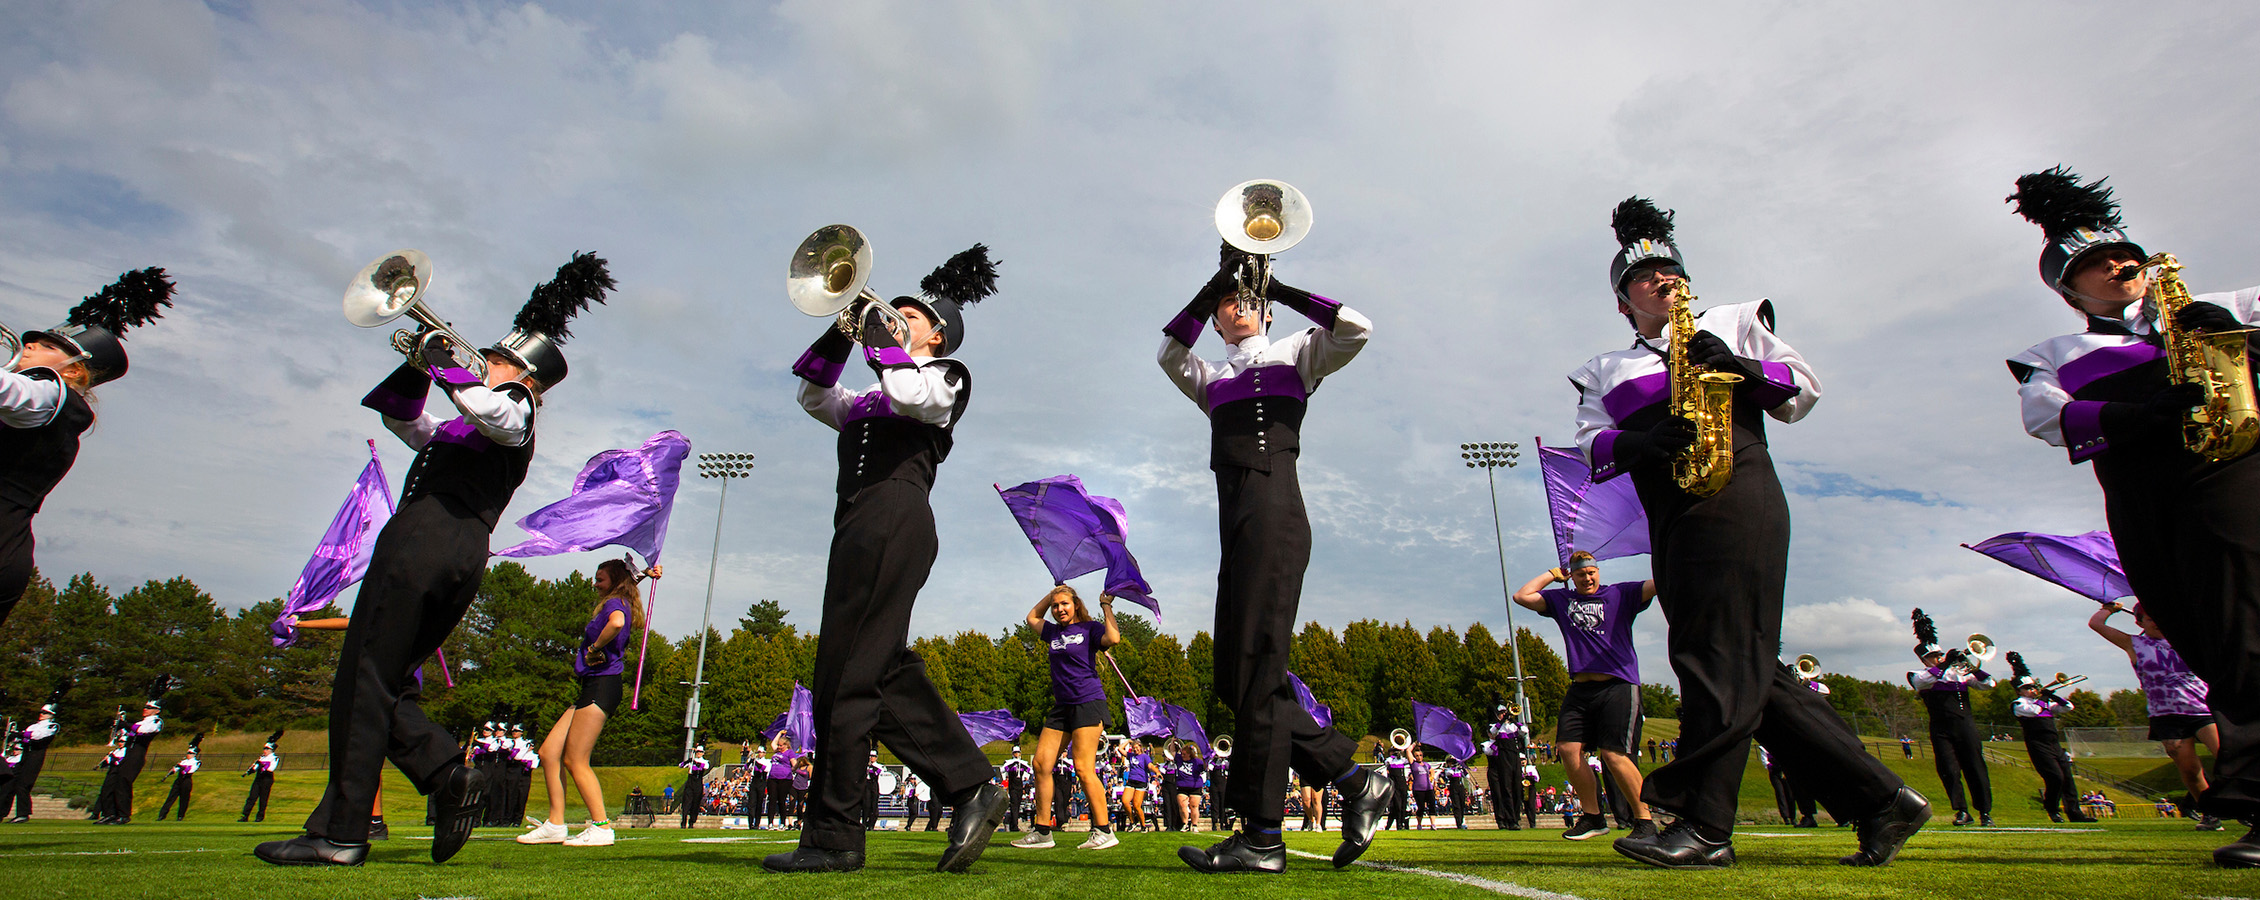 UW-Whitewater marching band members perform at a football game